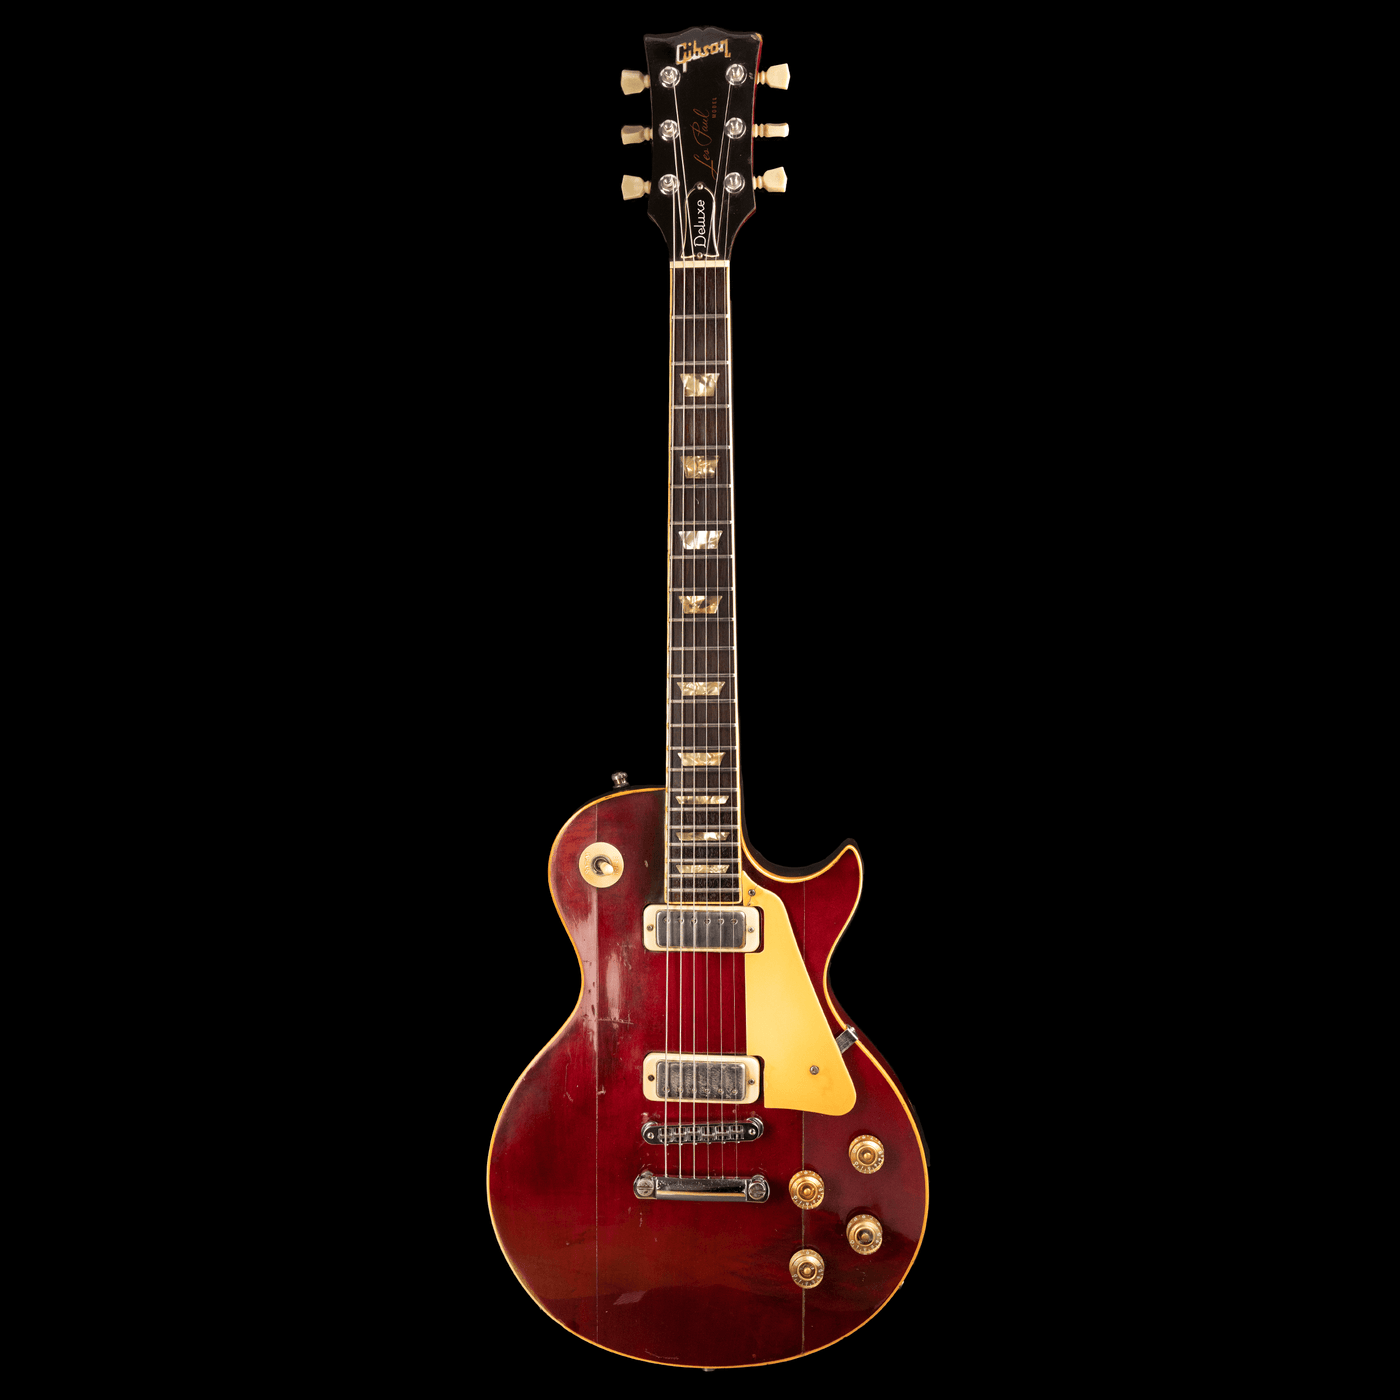 Gibson Les Paul Deluxe Wine Red '79 - $4399990 - Gearhub - First released in 1969, the Deluxe saw the introduction of the mini humbucker™ to the Les Paul lineup. Mini humbuckers retain the hum-free performance of their full-sized cousins but with a somewhat clearer and brighter tonality. The new Deluxe has features that were inspired by those early models from the 1970s, with a non-weight relief mahogany body and bound maple top, a bound mahogany neck with a Rounded C profile, vintage-style Keystone tuners,